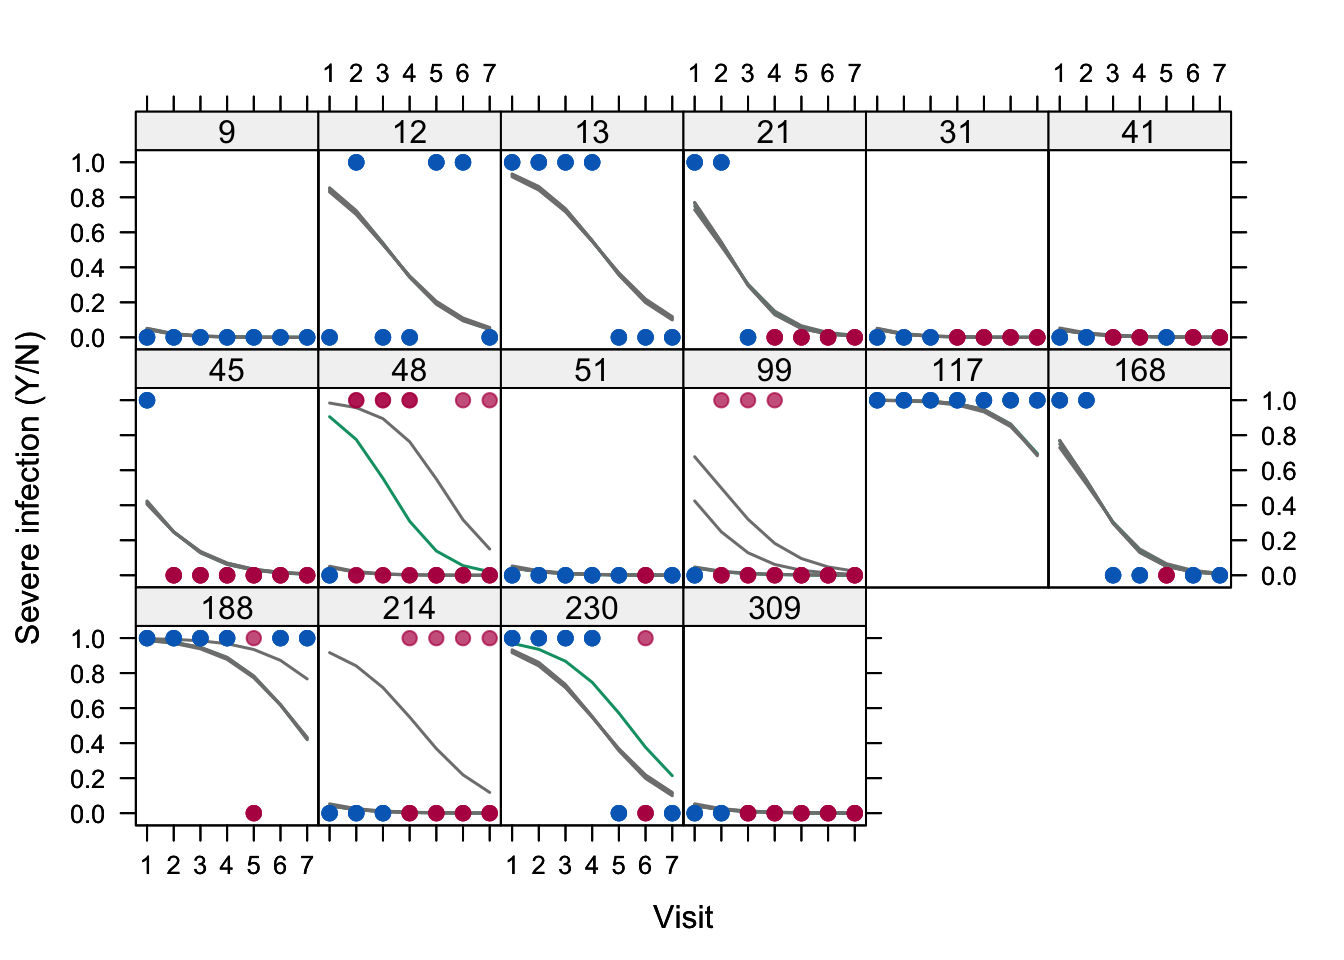 Plot of observed (blue) and imputed (red) infection (Yes/No) by visit for 16 selected persons in the toenail data (\(m = 5\)). The lines visualize the subject-wise infection probability predicted by the generalized linear mixed model given visit, treatment and their interaction per imputed dataset.